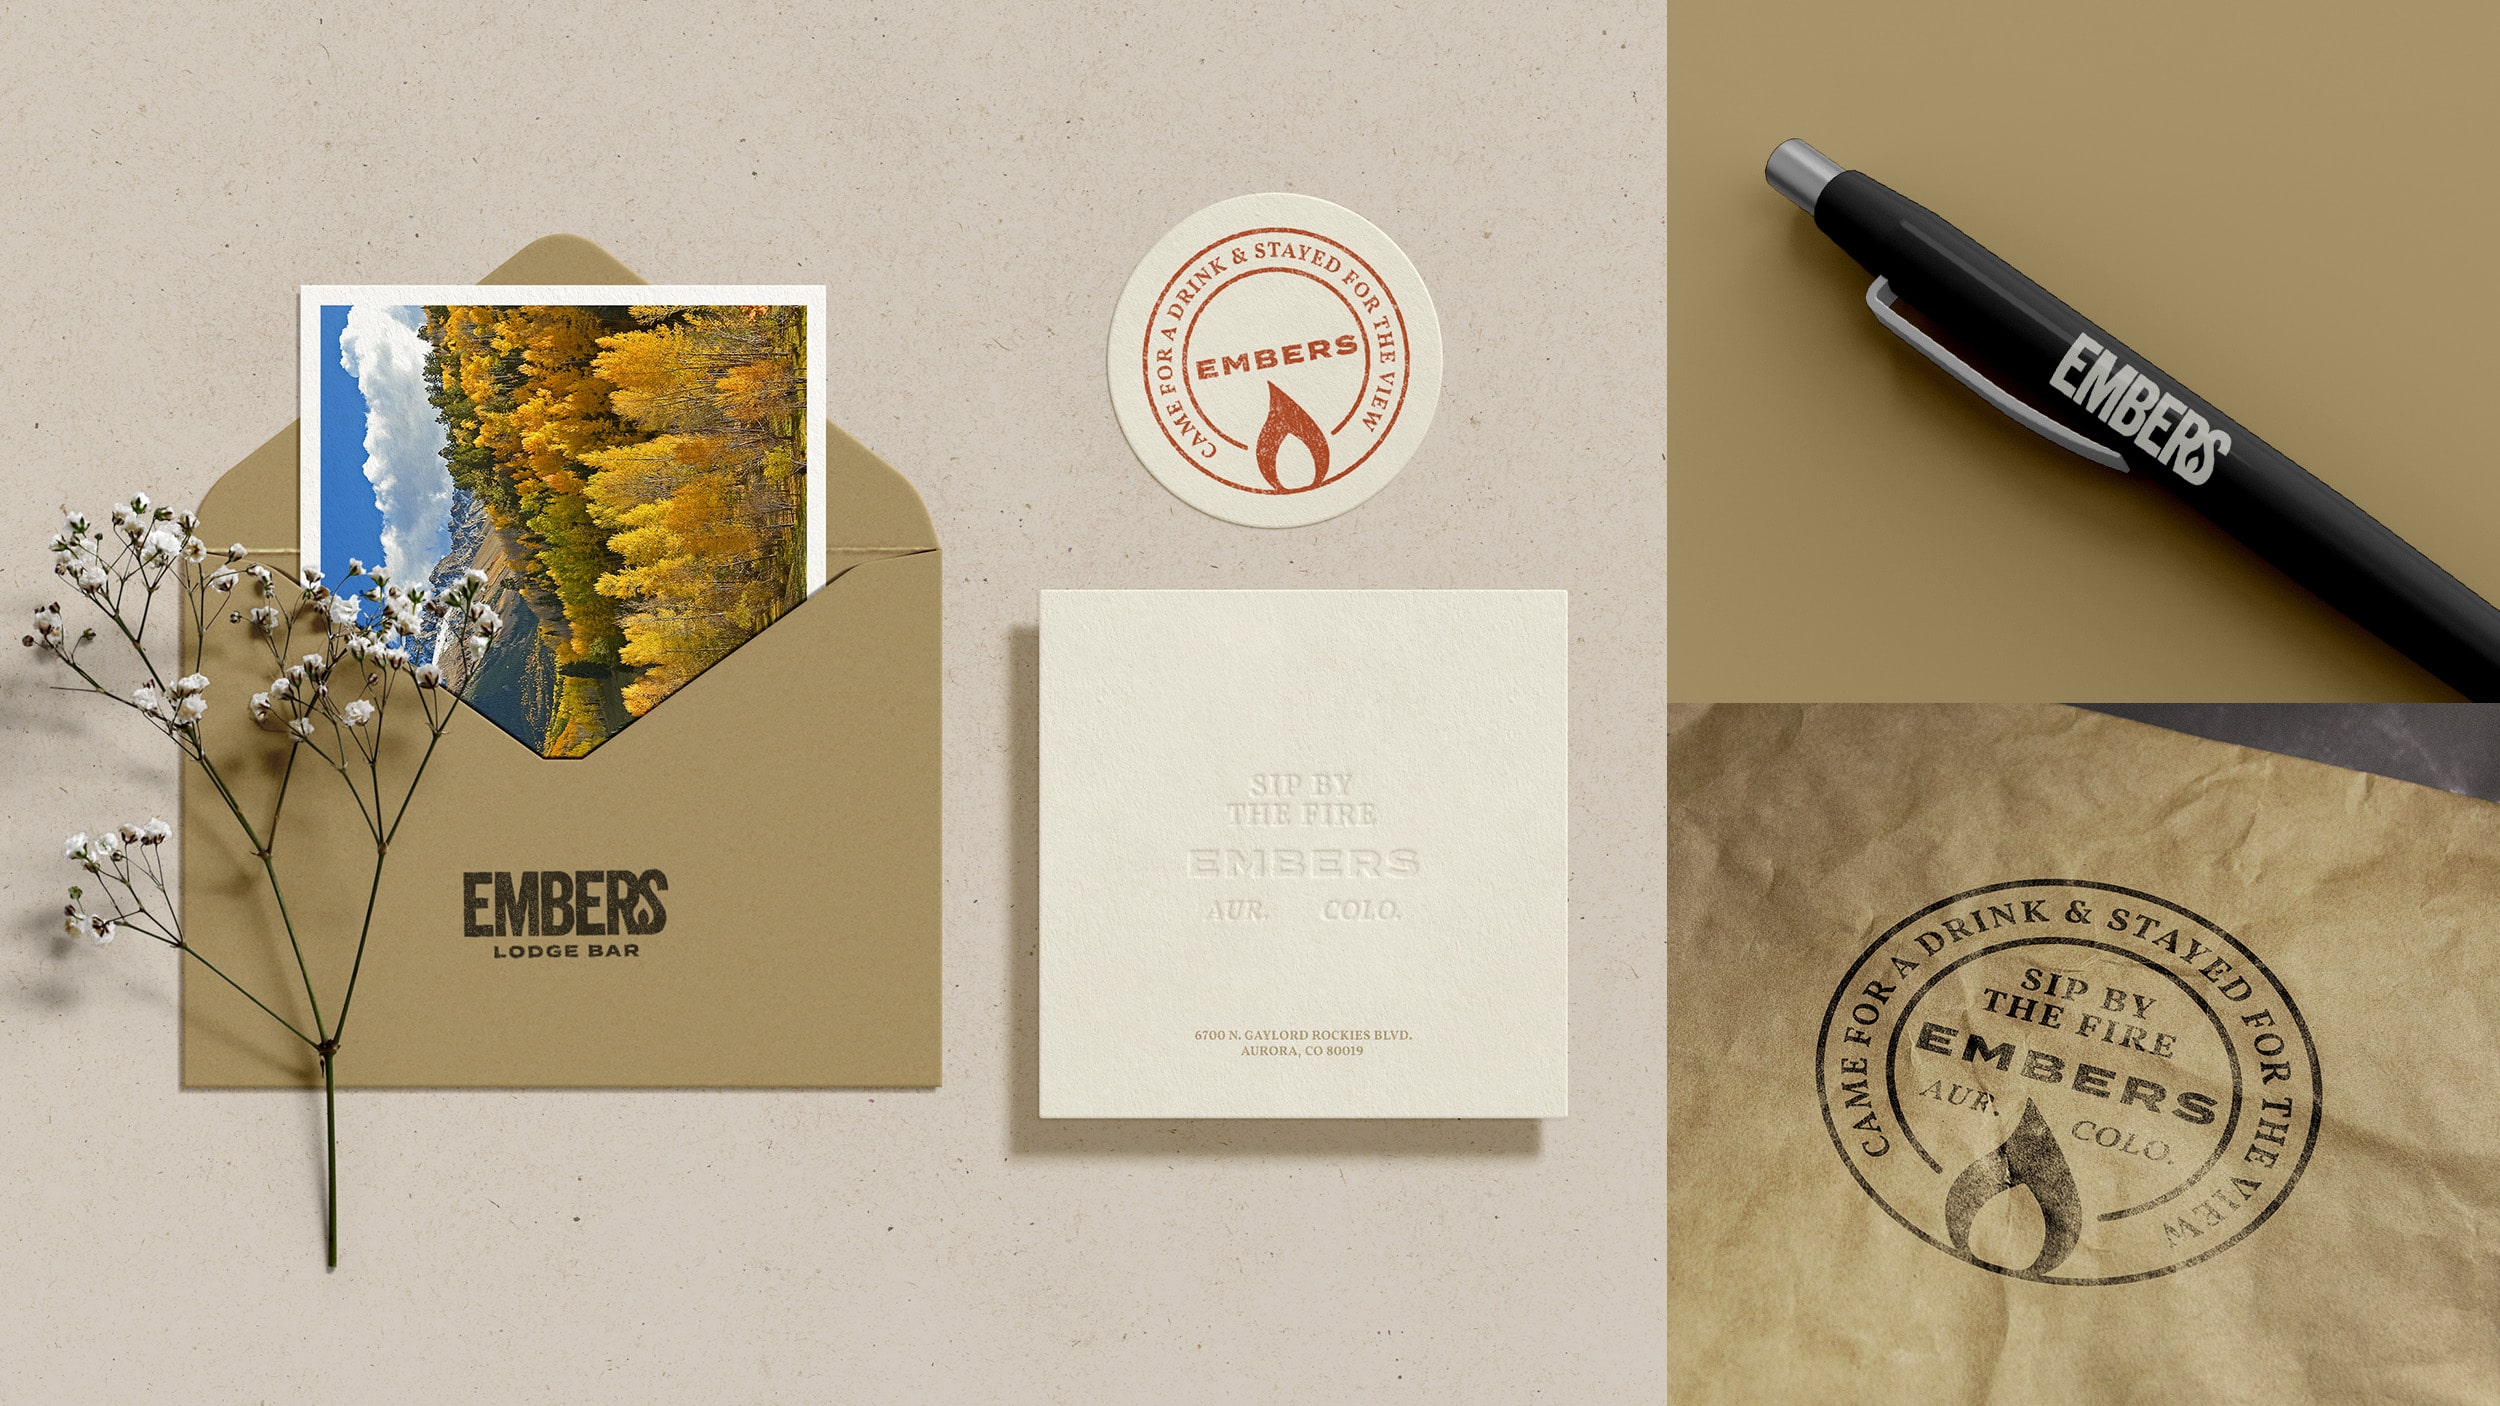 The Embers branding shown on an envelope, coaster, notepad, pen, and paper bag.